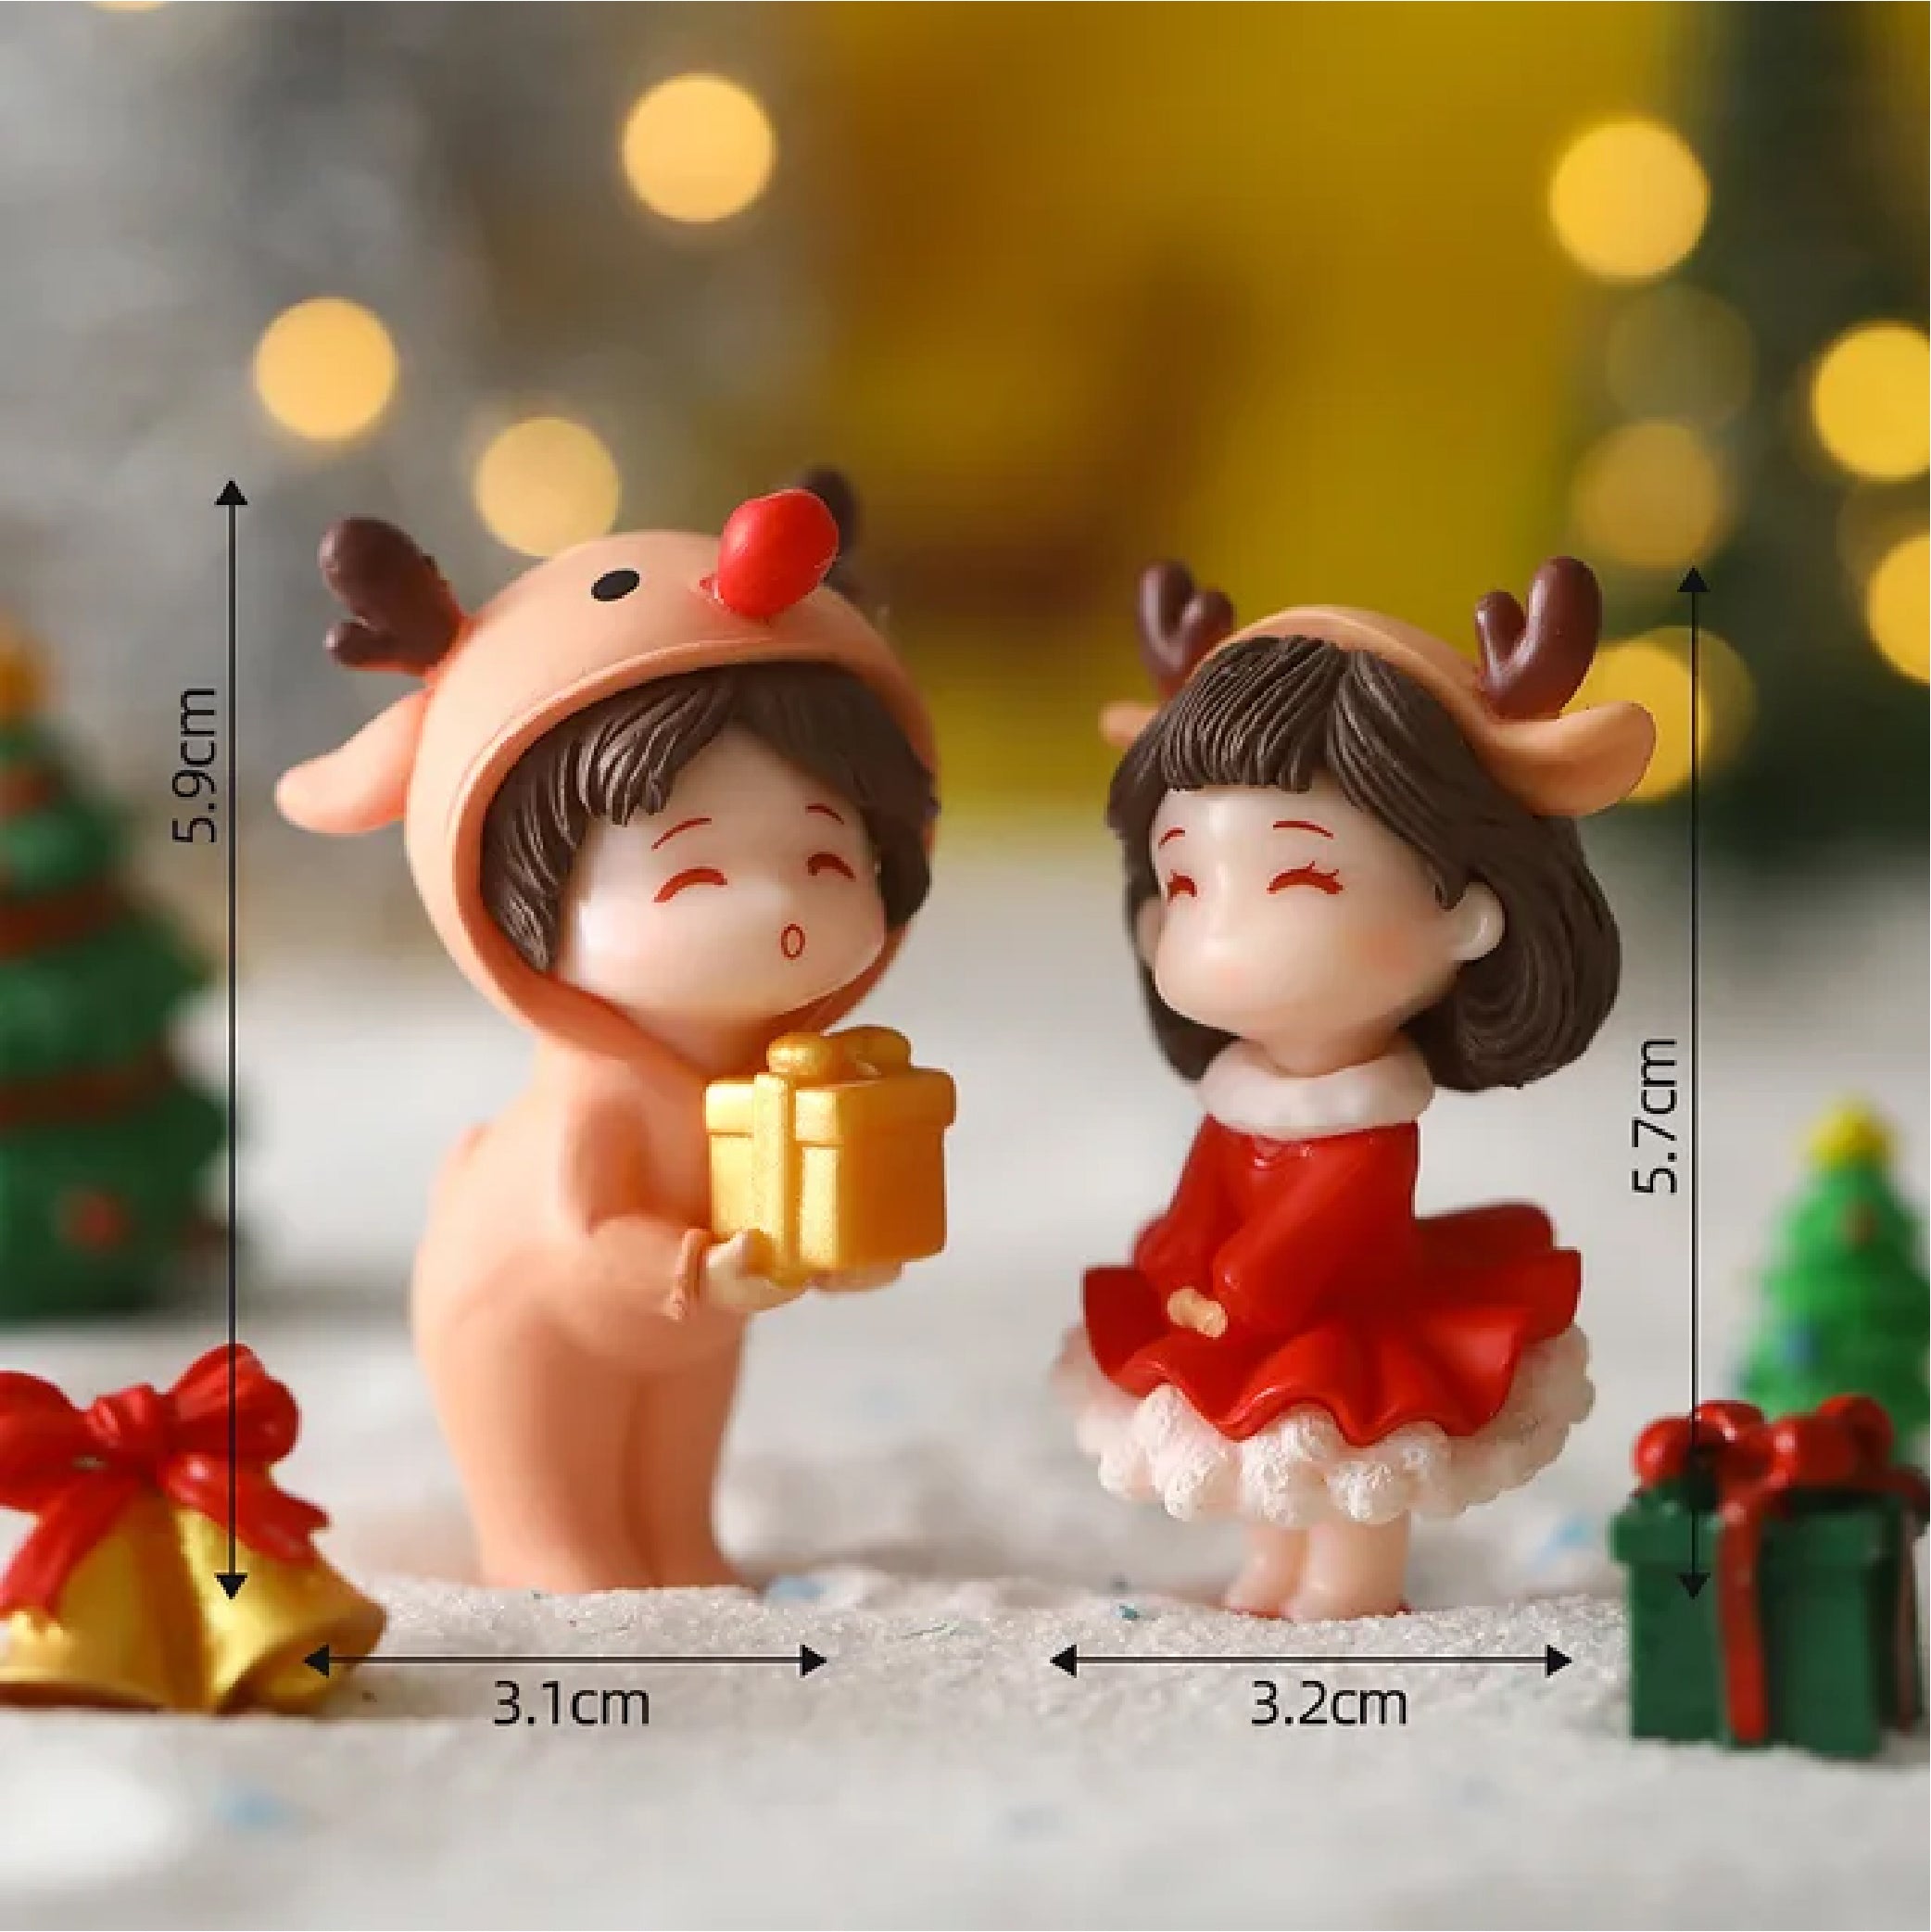 Couple Figurines For Christmas Decorations